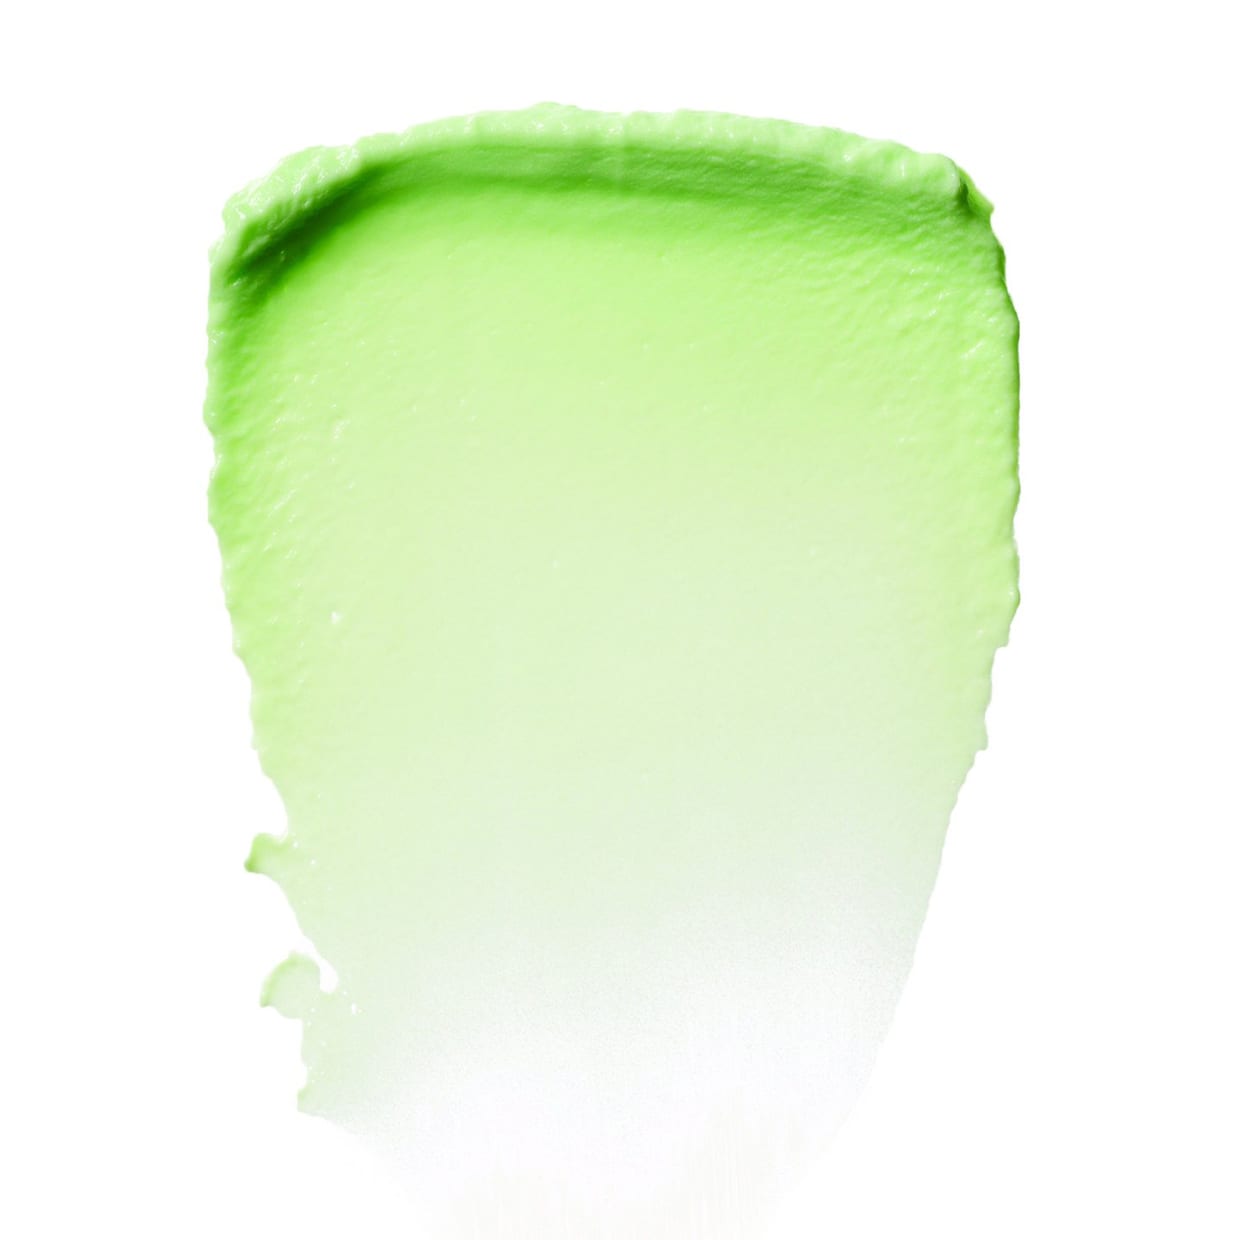 A green swipe of a face mask.